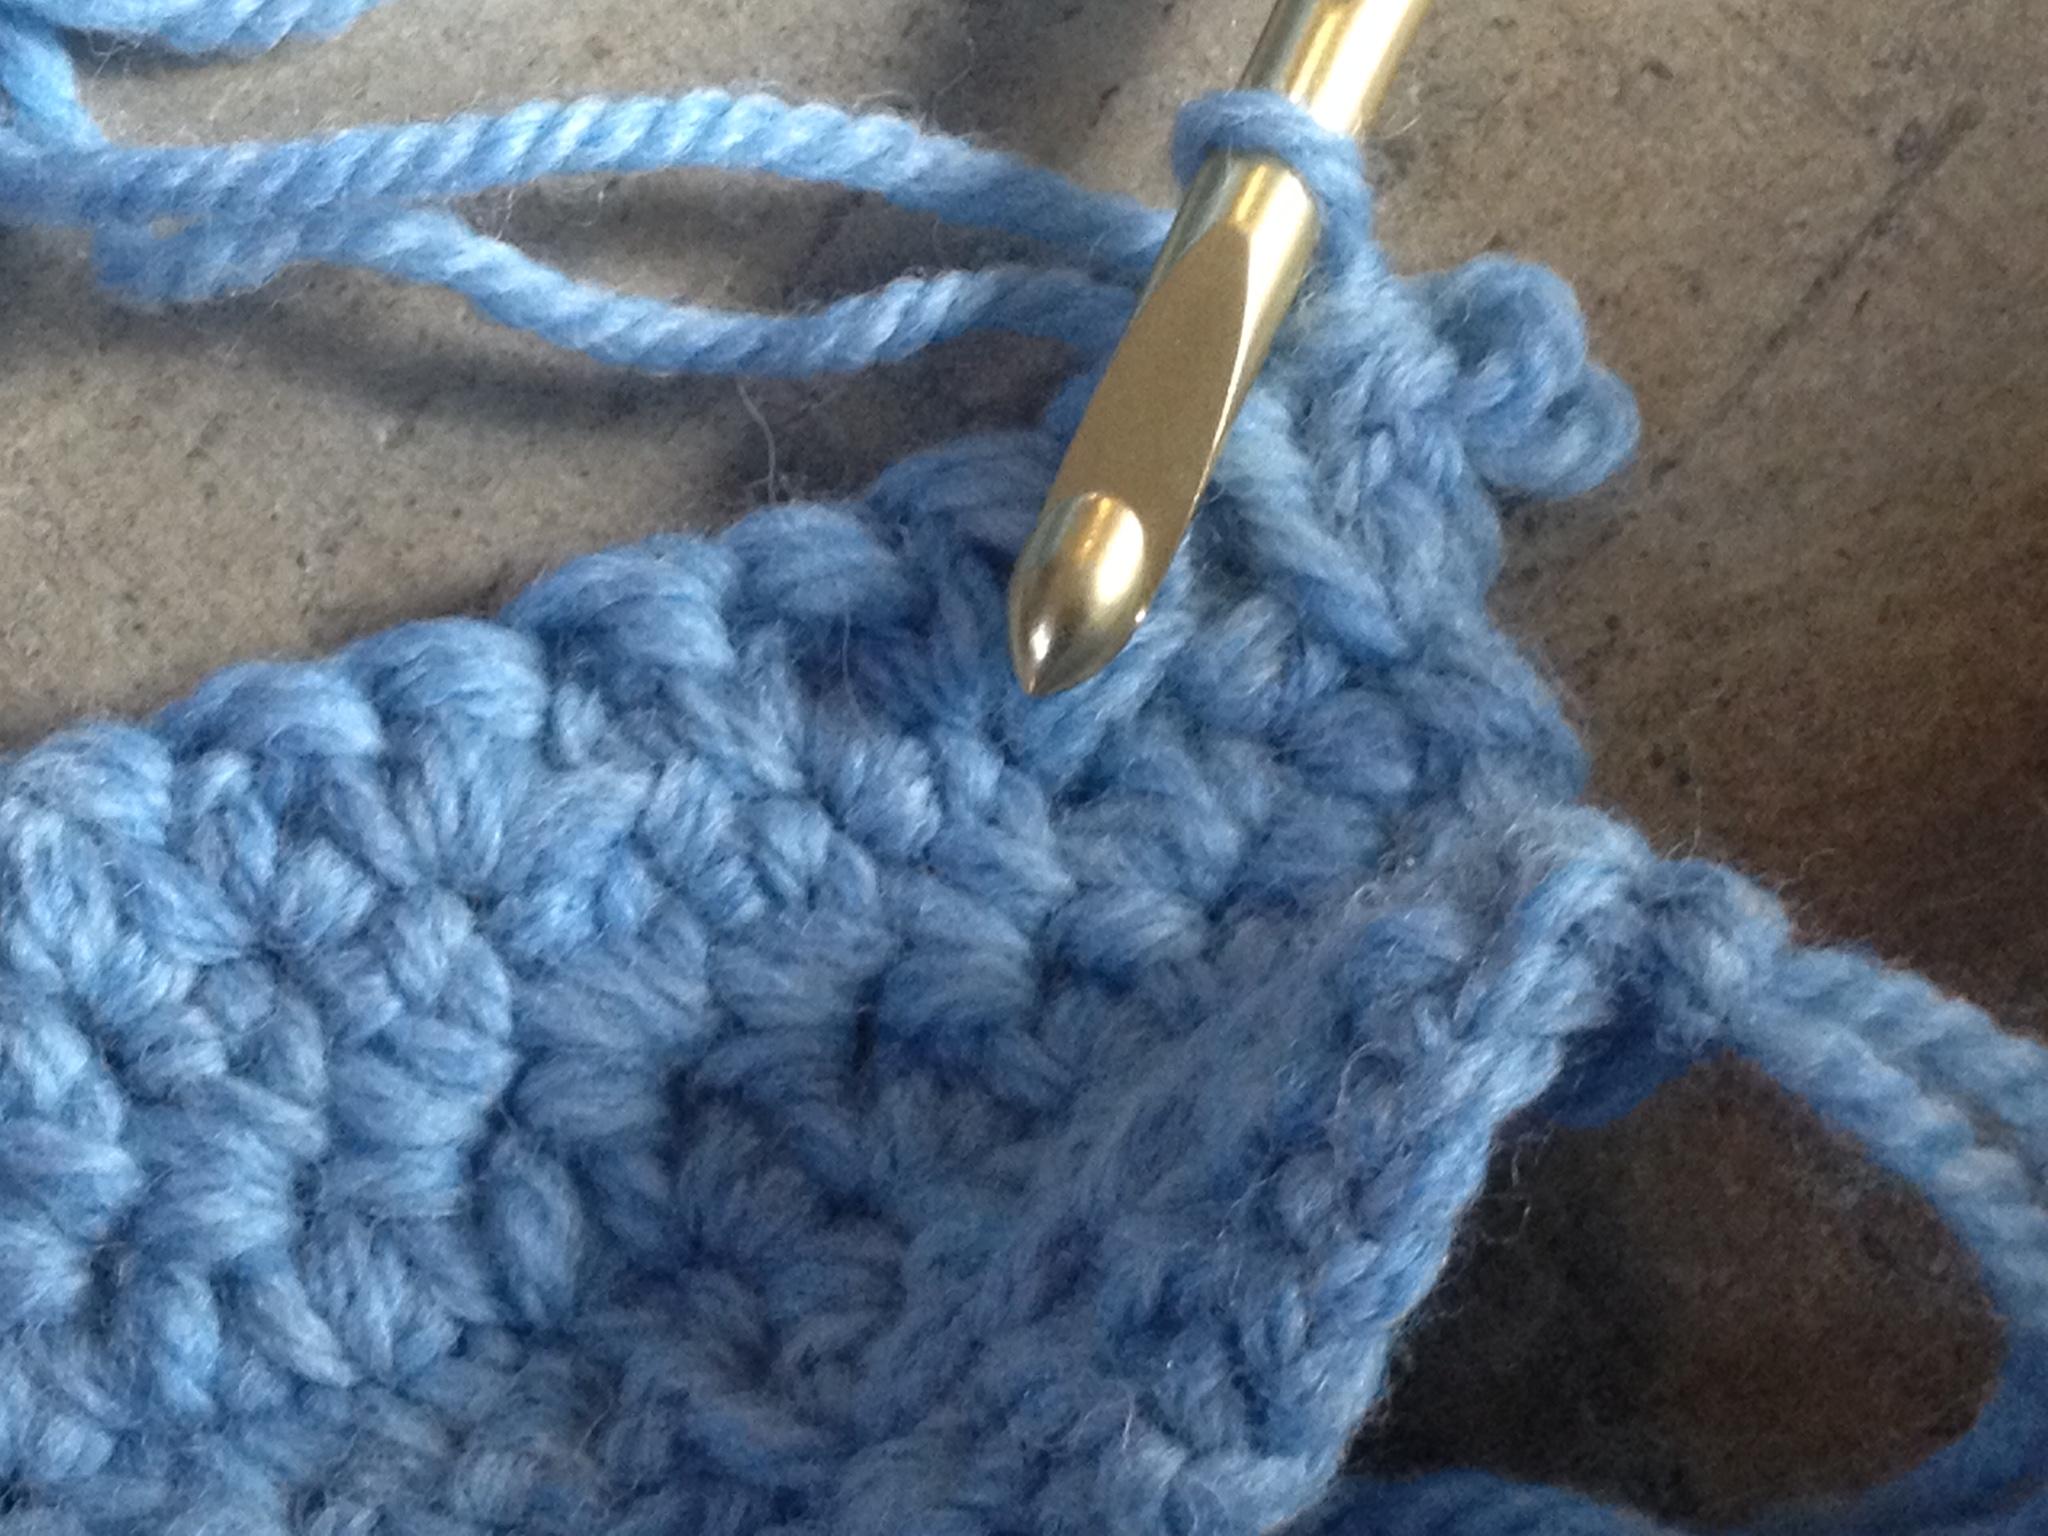 Beginning Crochet - Free Drop In and Create